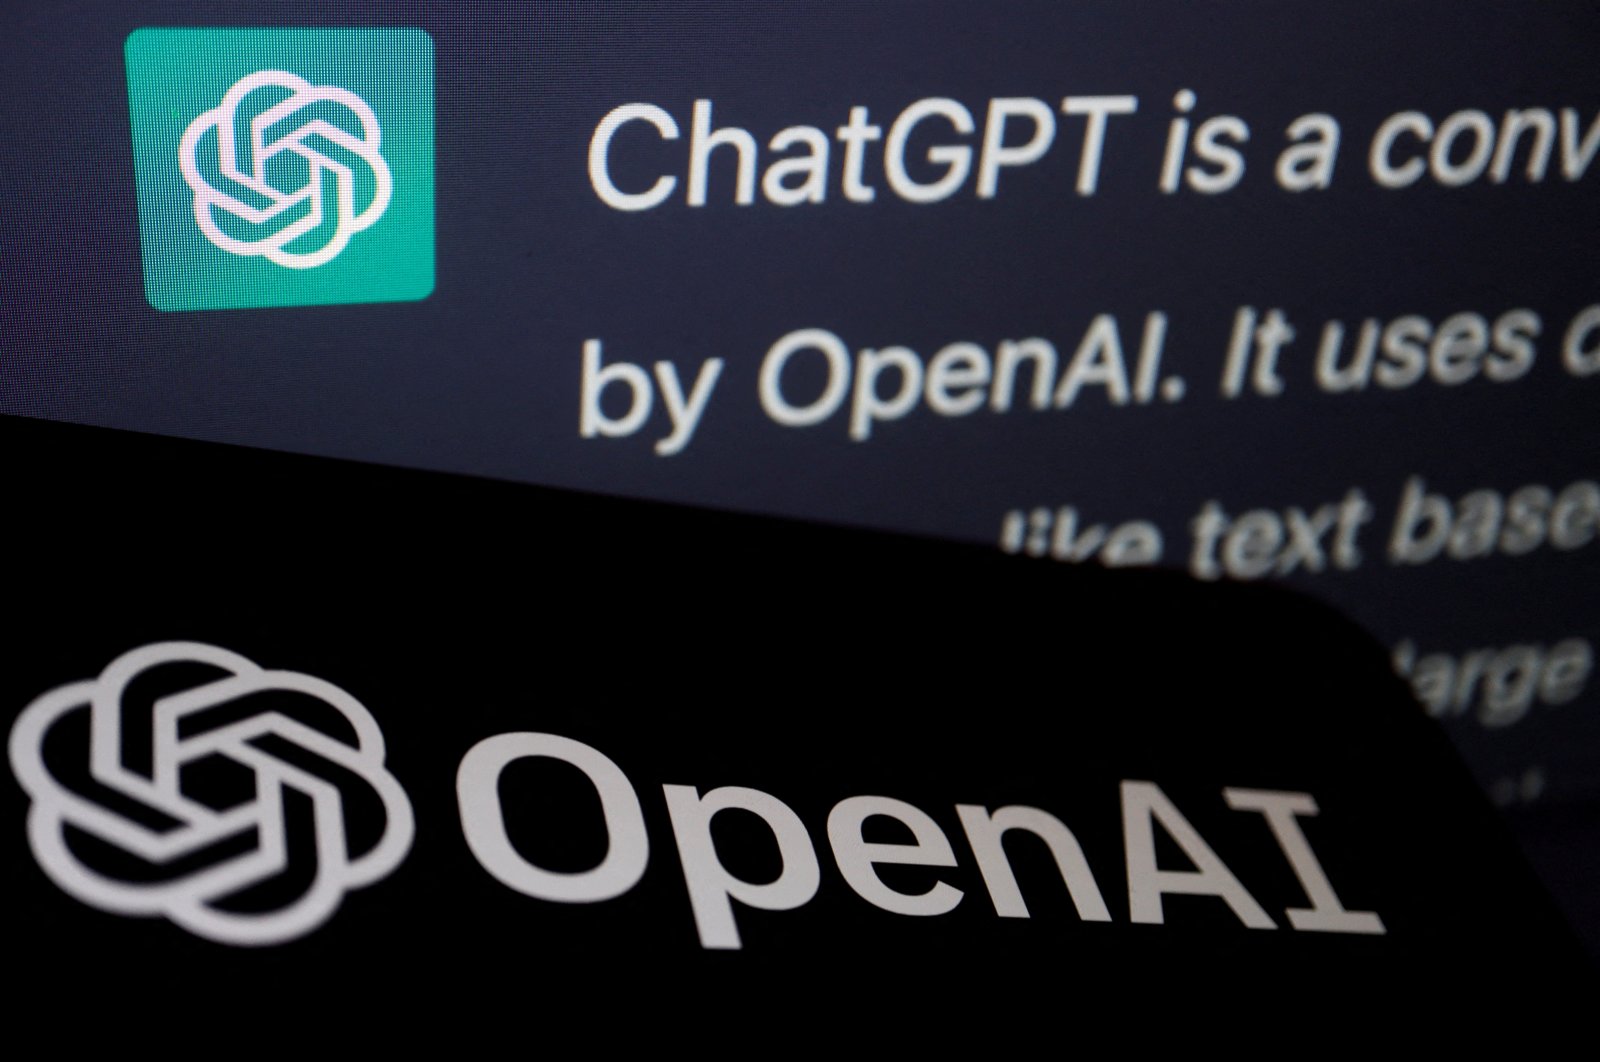 The logo of OpenAI is displayed near a response by its AI chatbot ChatGPT on its website, in this illustration picture taken Feb. 9, 2023. (Reuters Photo)